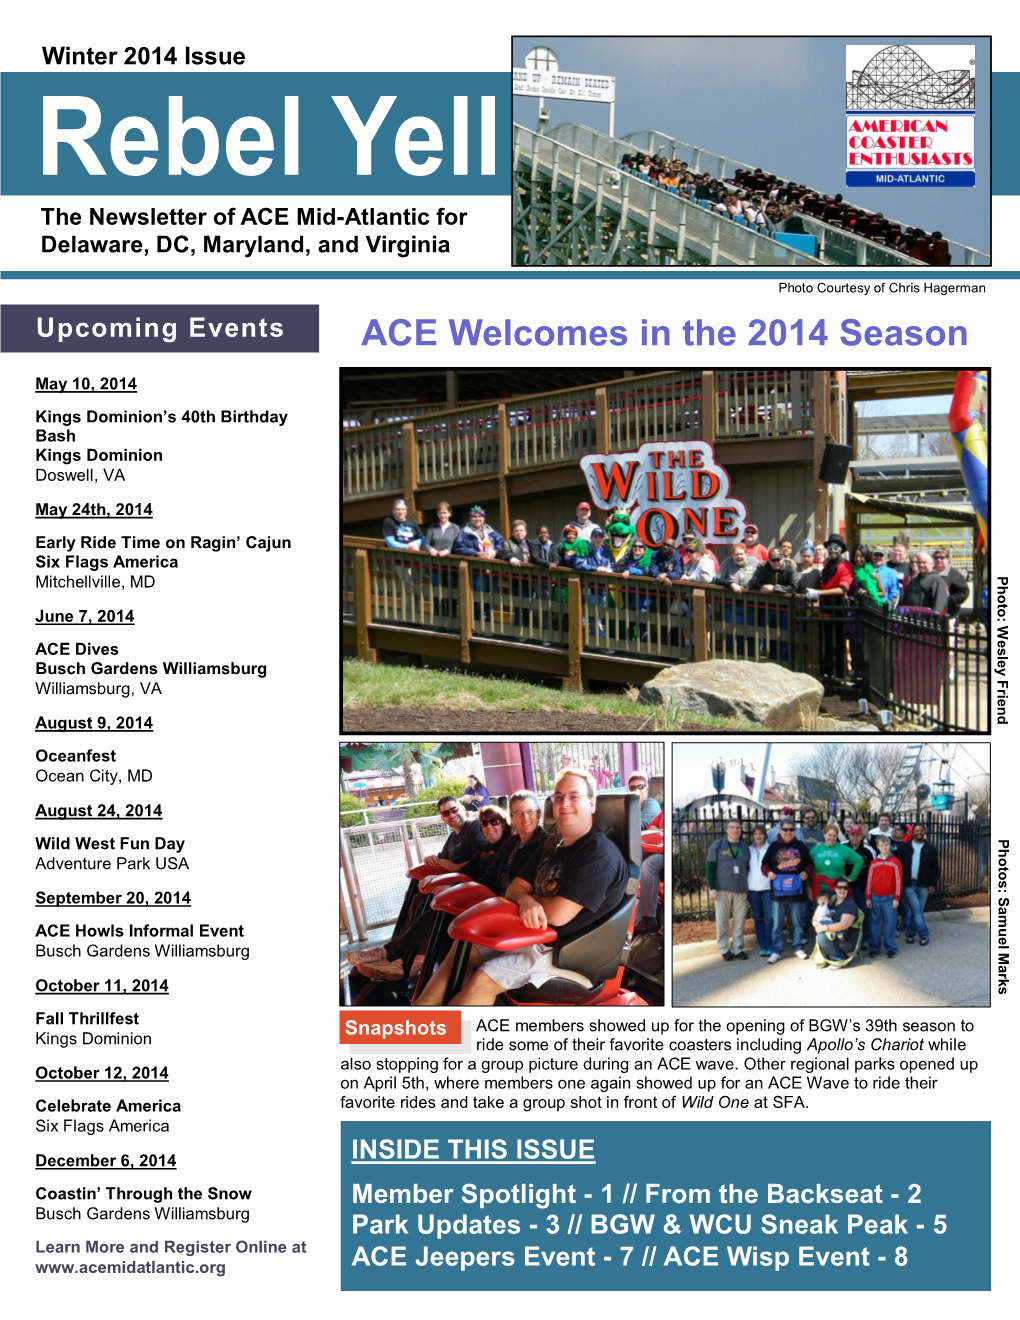 Rebel Yell the Newsletter of ACE Mid-Atlantic for Delaware, DC, Maryland, and Virginia